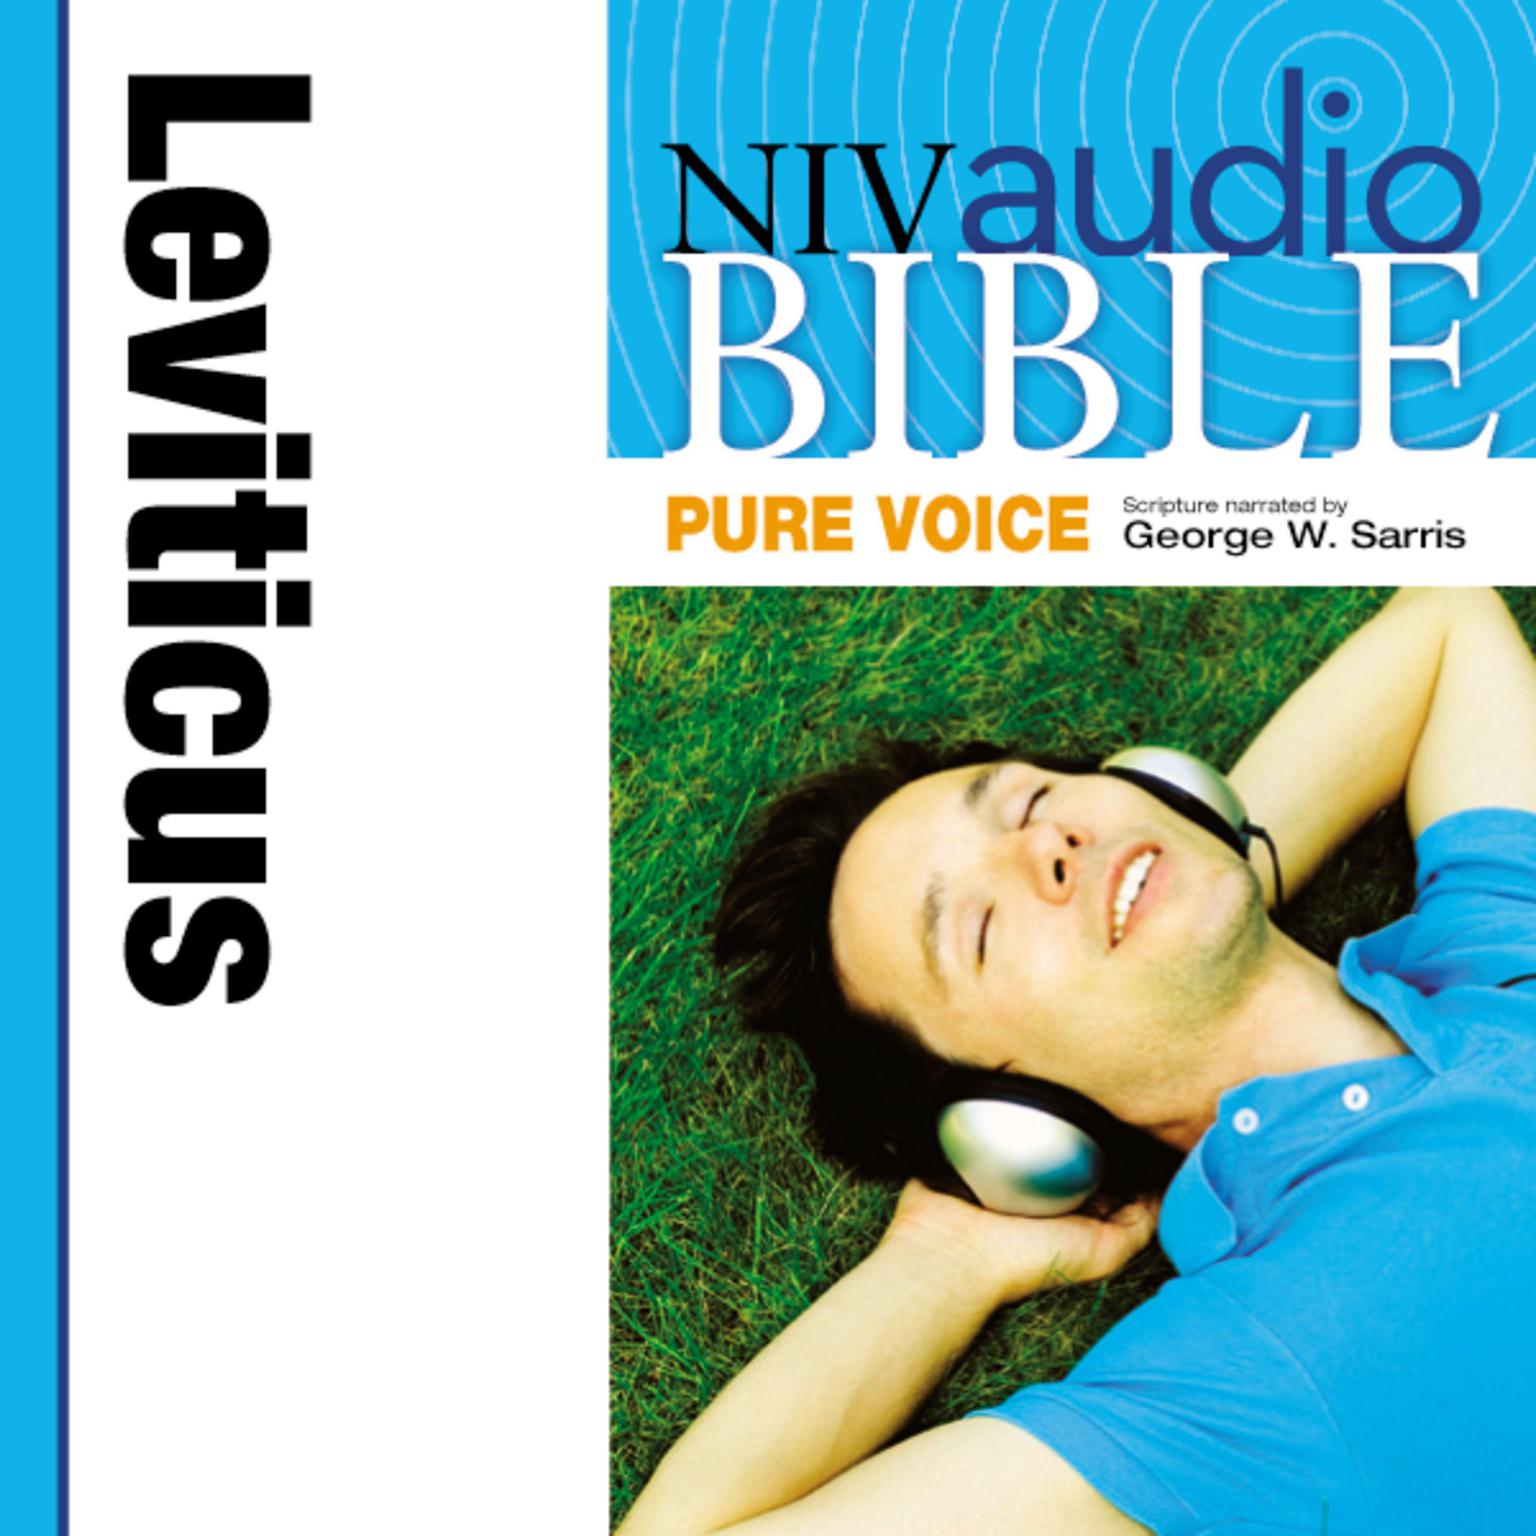 Pure Voice Audio Bible - New International Version, NIV (Narrated by George W. Sarris): (03) Leviticus: Leviticus Audiobook, by Zondervan